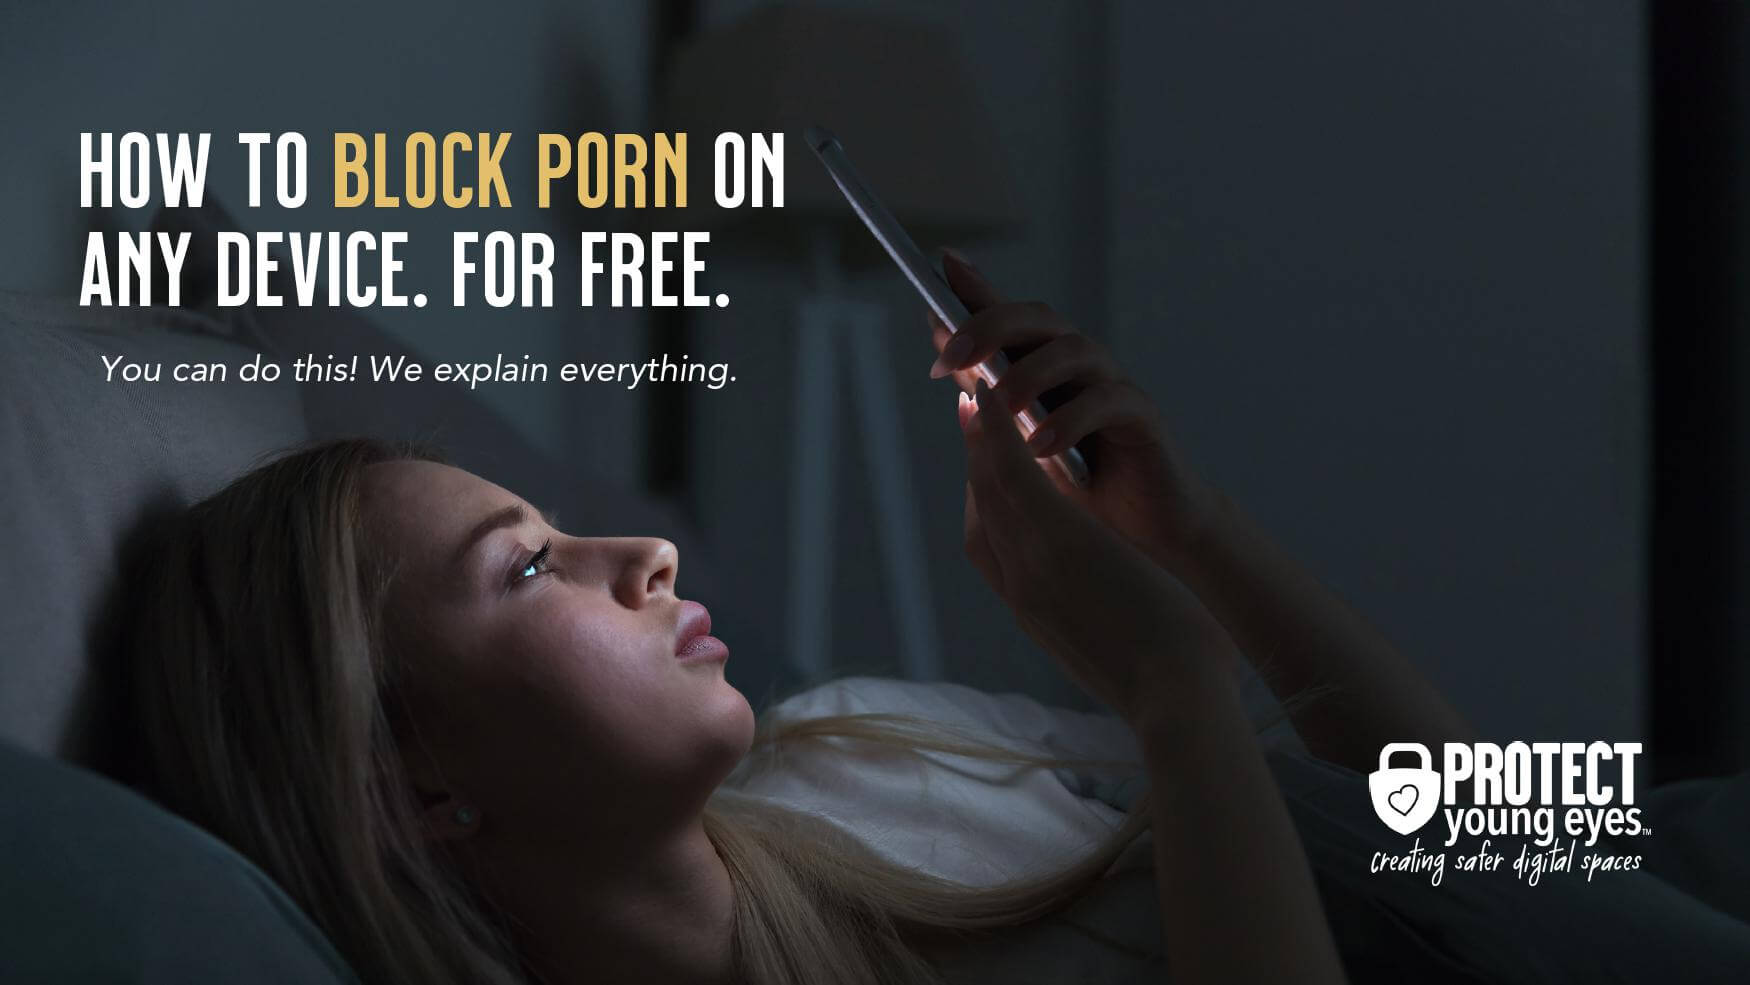 Xnxx 2018 Pro - How to Block Porn on Any Device. For Free. - Protect Young Eyes